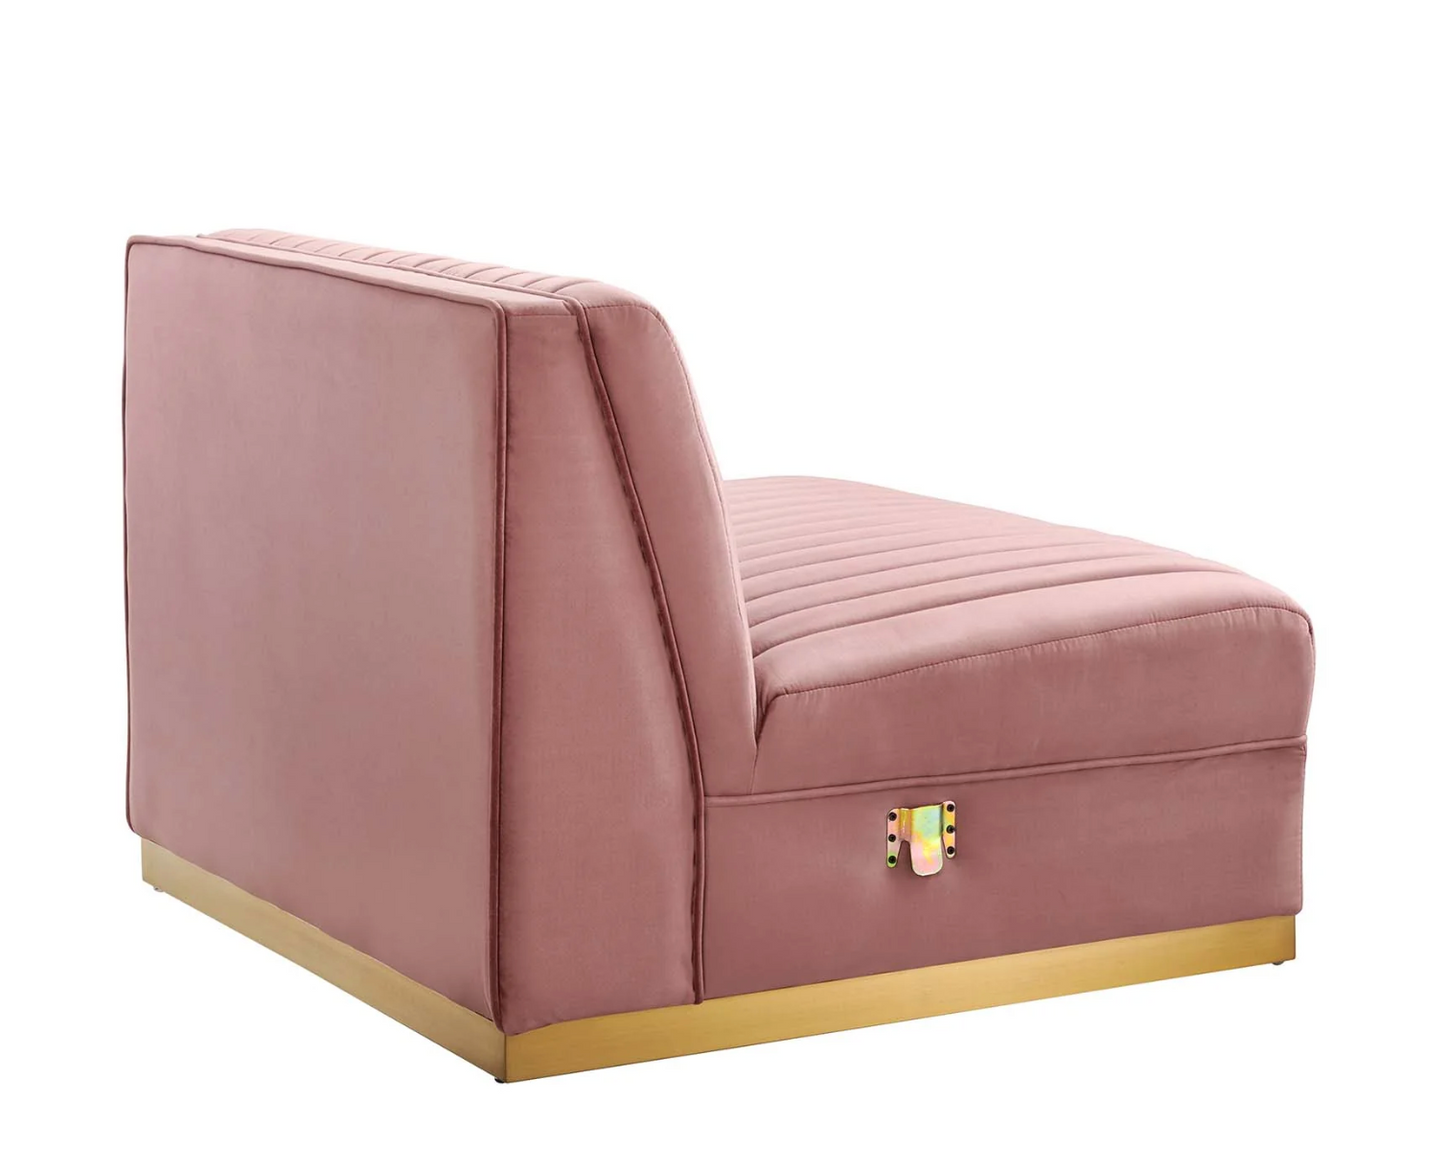 Channel Tufted Blush Pink Velvet Sectional Sofa Armless Chair